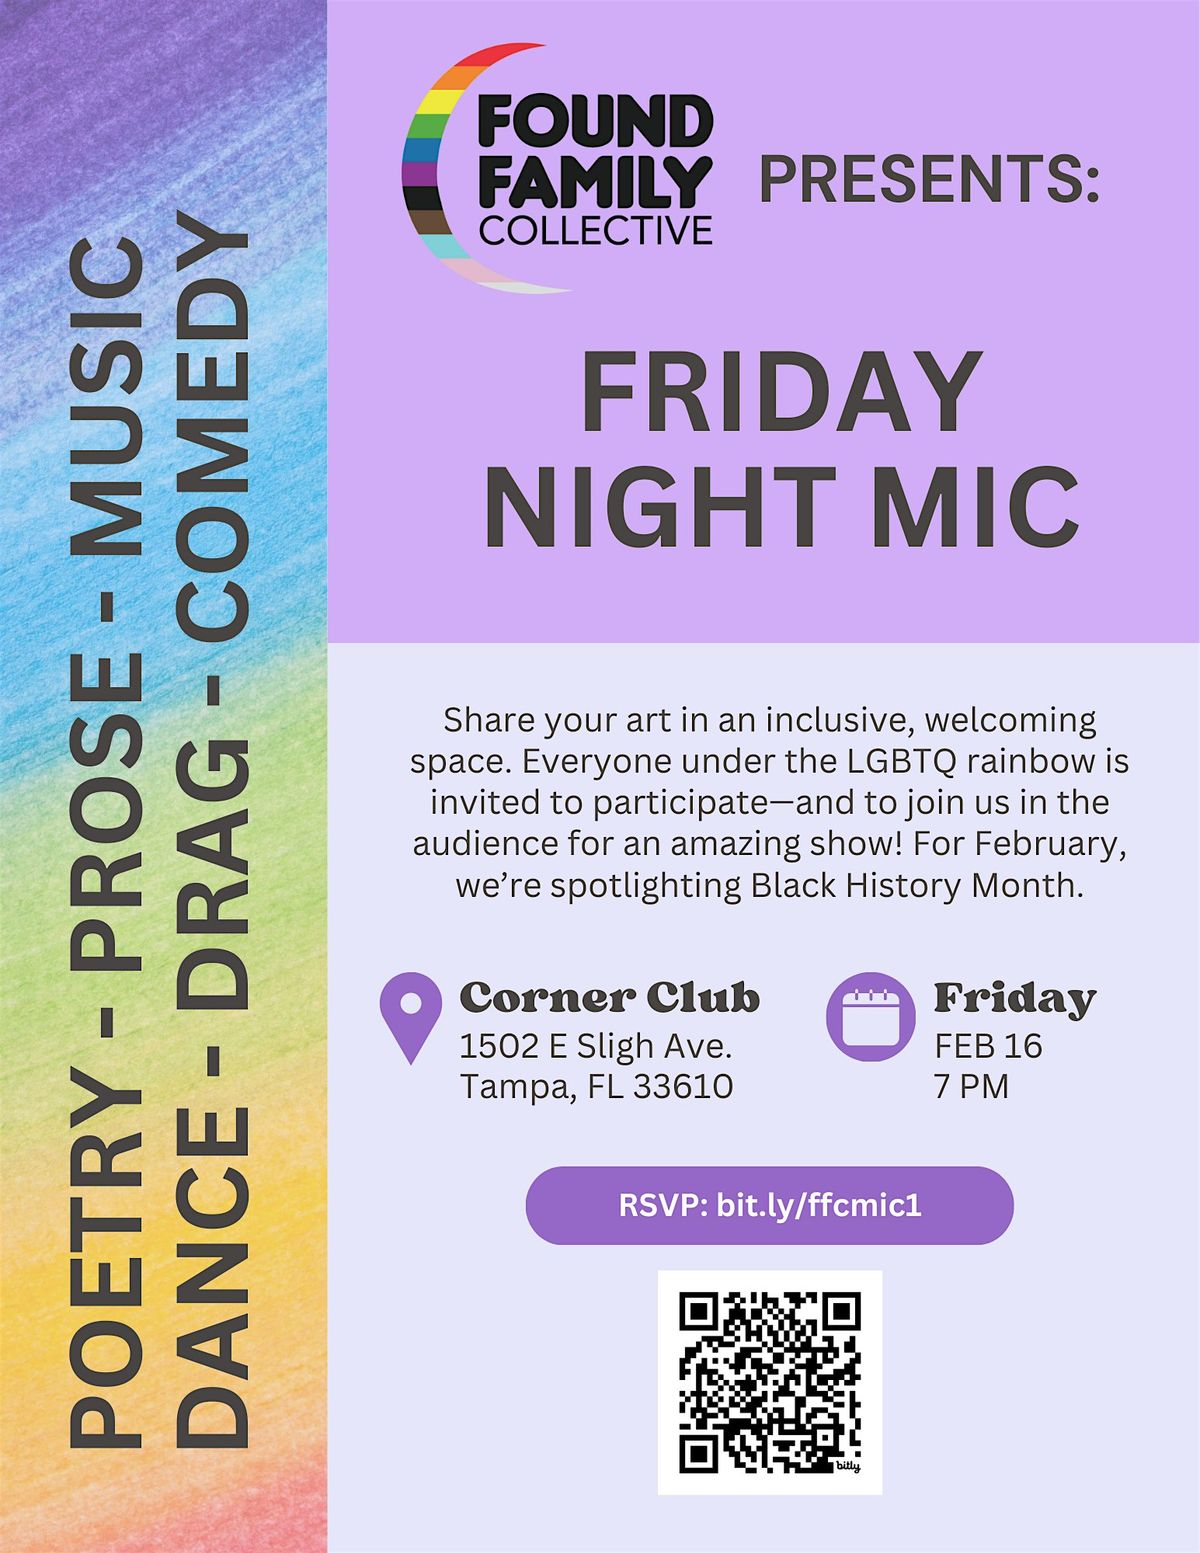 Found Family Collective Presents Friday Night Mic